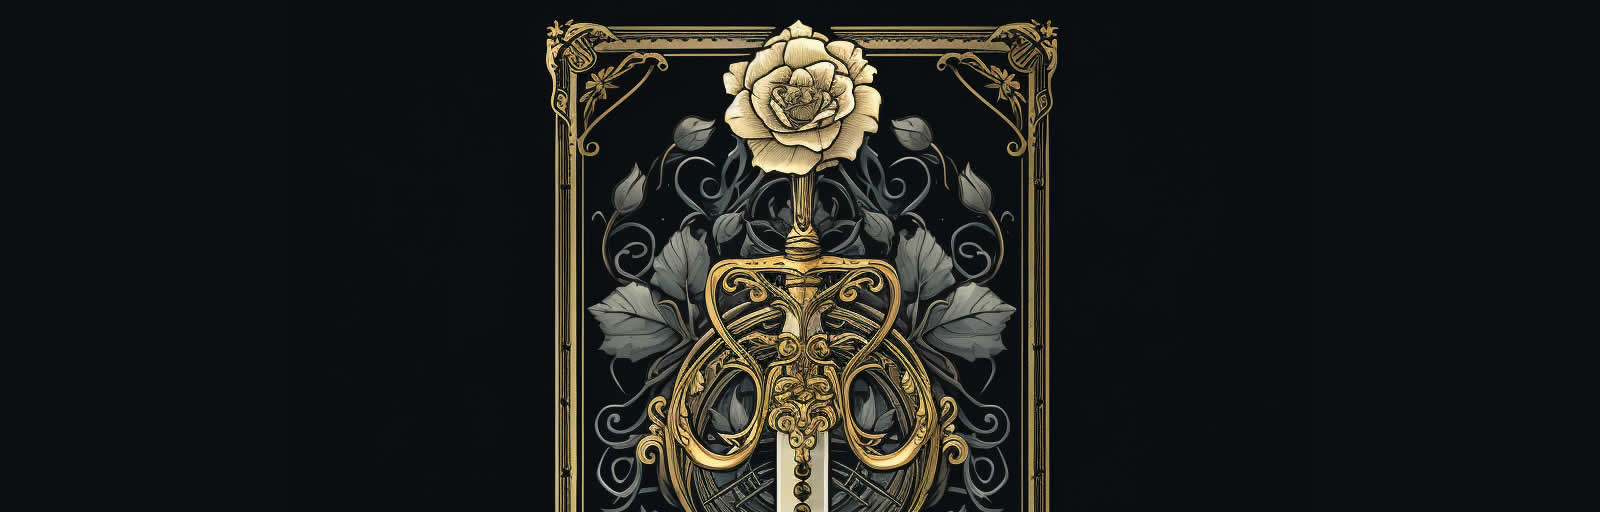 Healing Light, Ace of Swords meaning, Main image